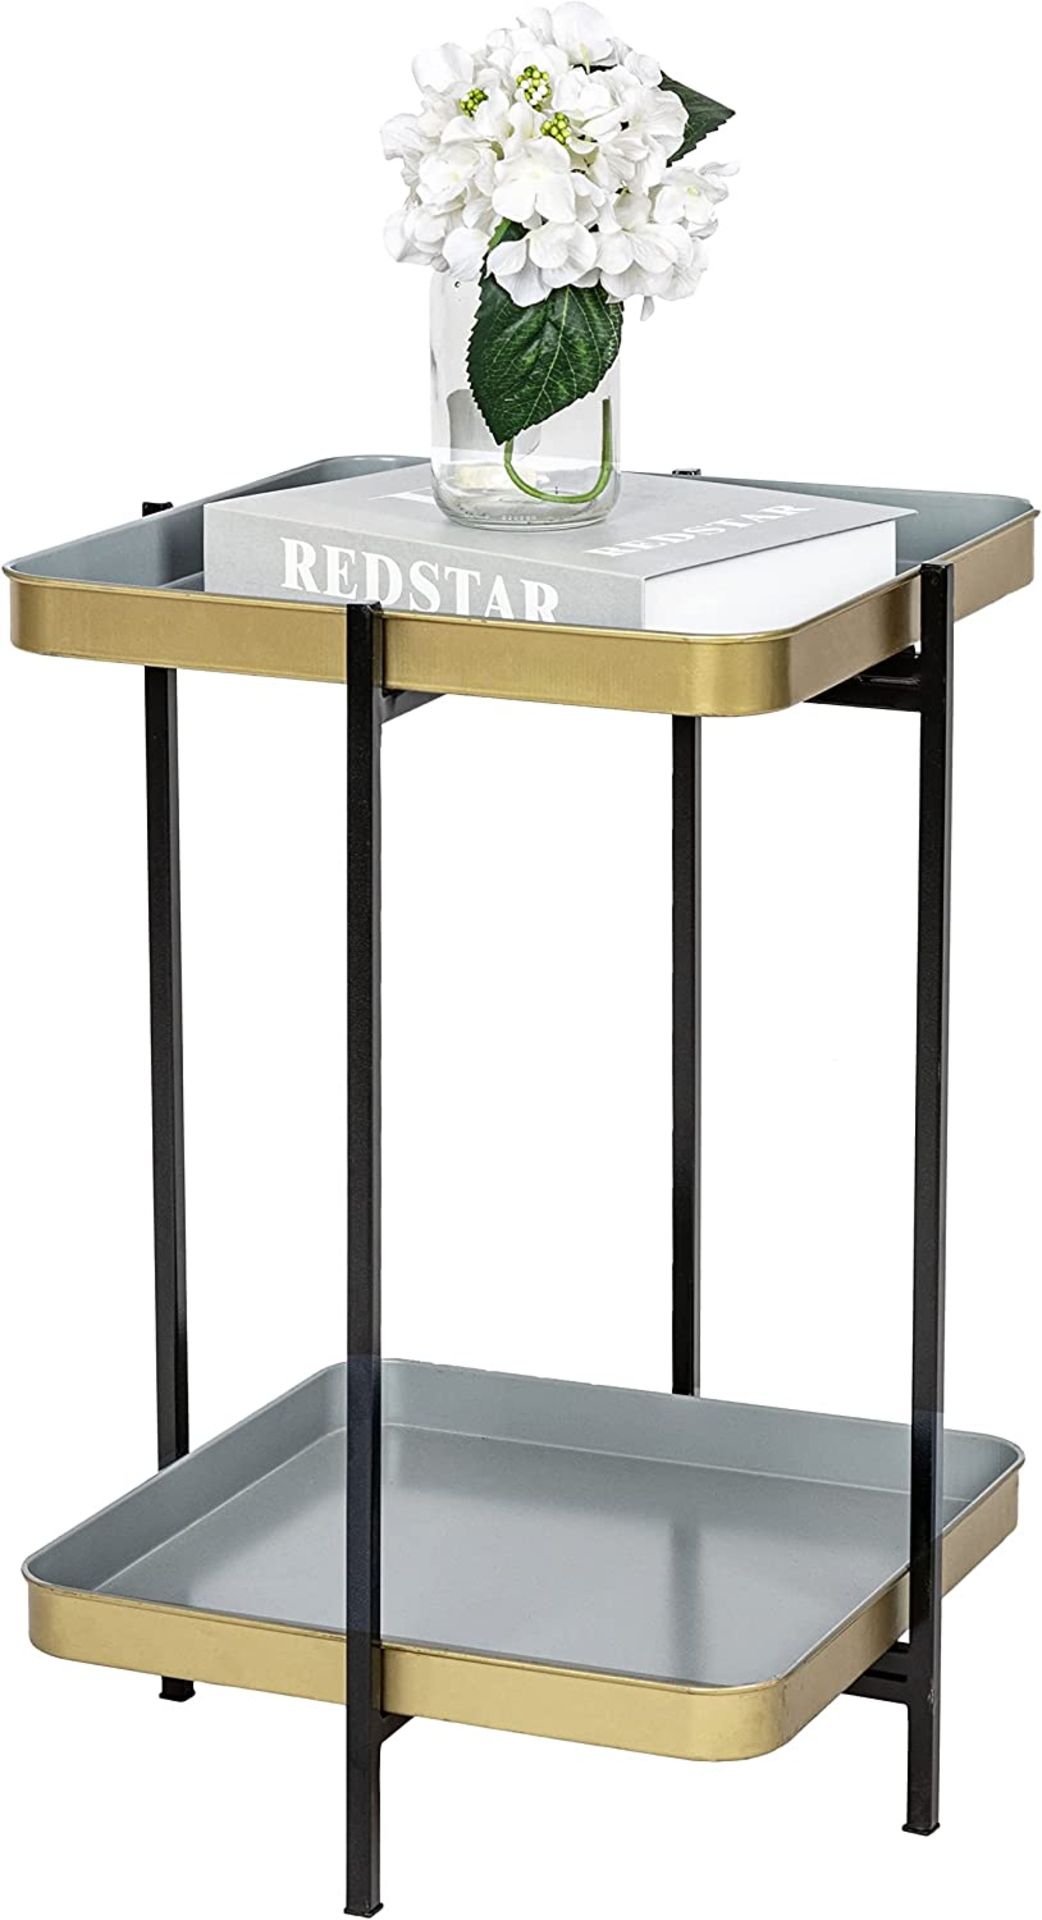 2-Tier Tray Top Side Table, End Table Folding Table Legs, Nightstand Sofa Side Coffee Table